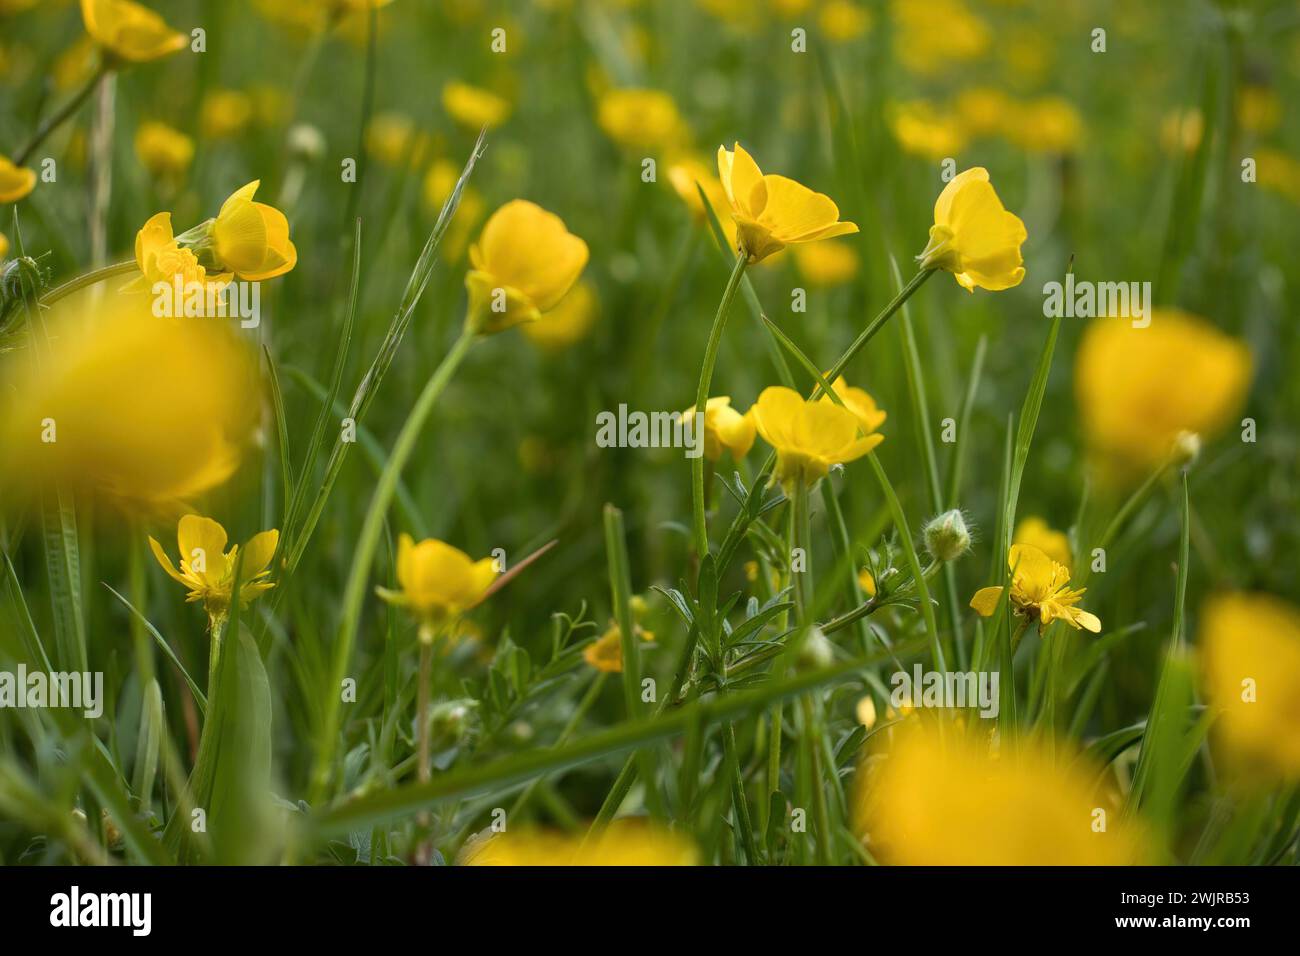 Beautiful small yellow flowers growing in green grass in a field in Rotenfels, above Bad Munster, Germany on a spring day. Stock Photo